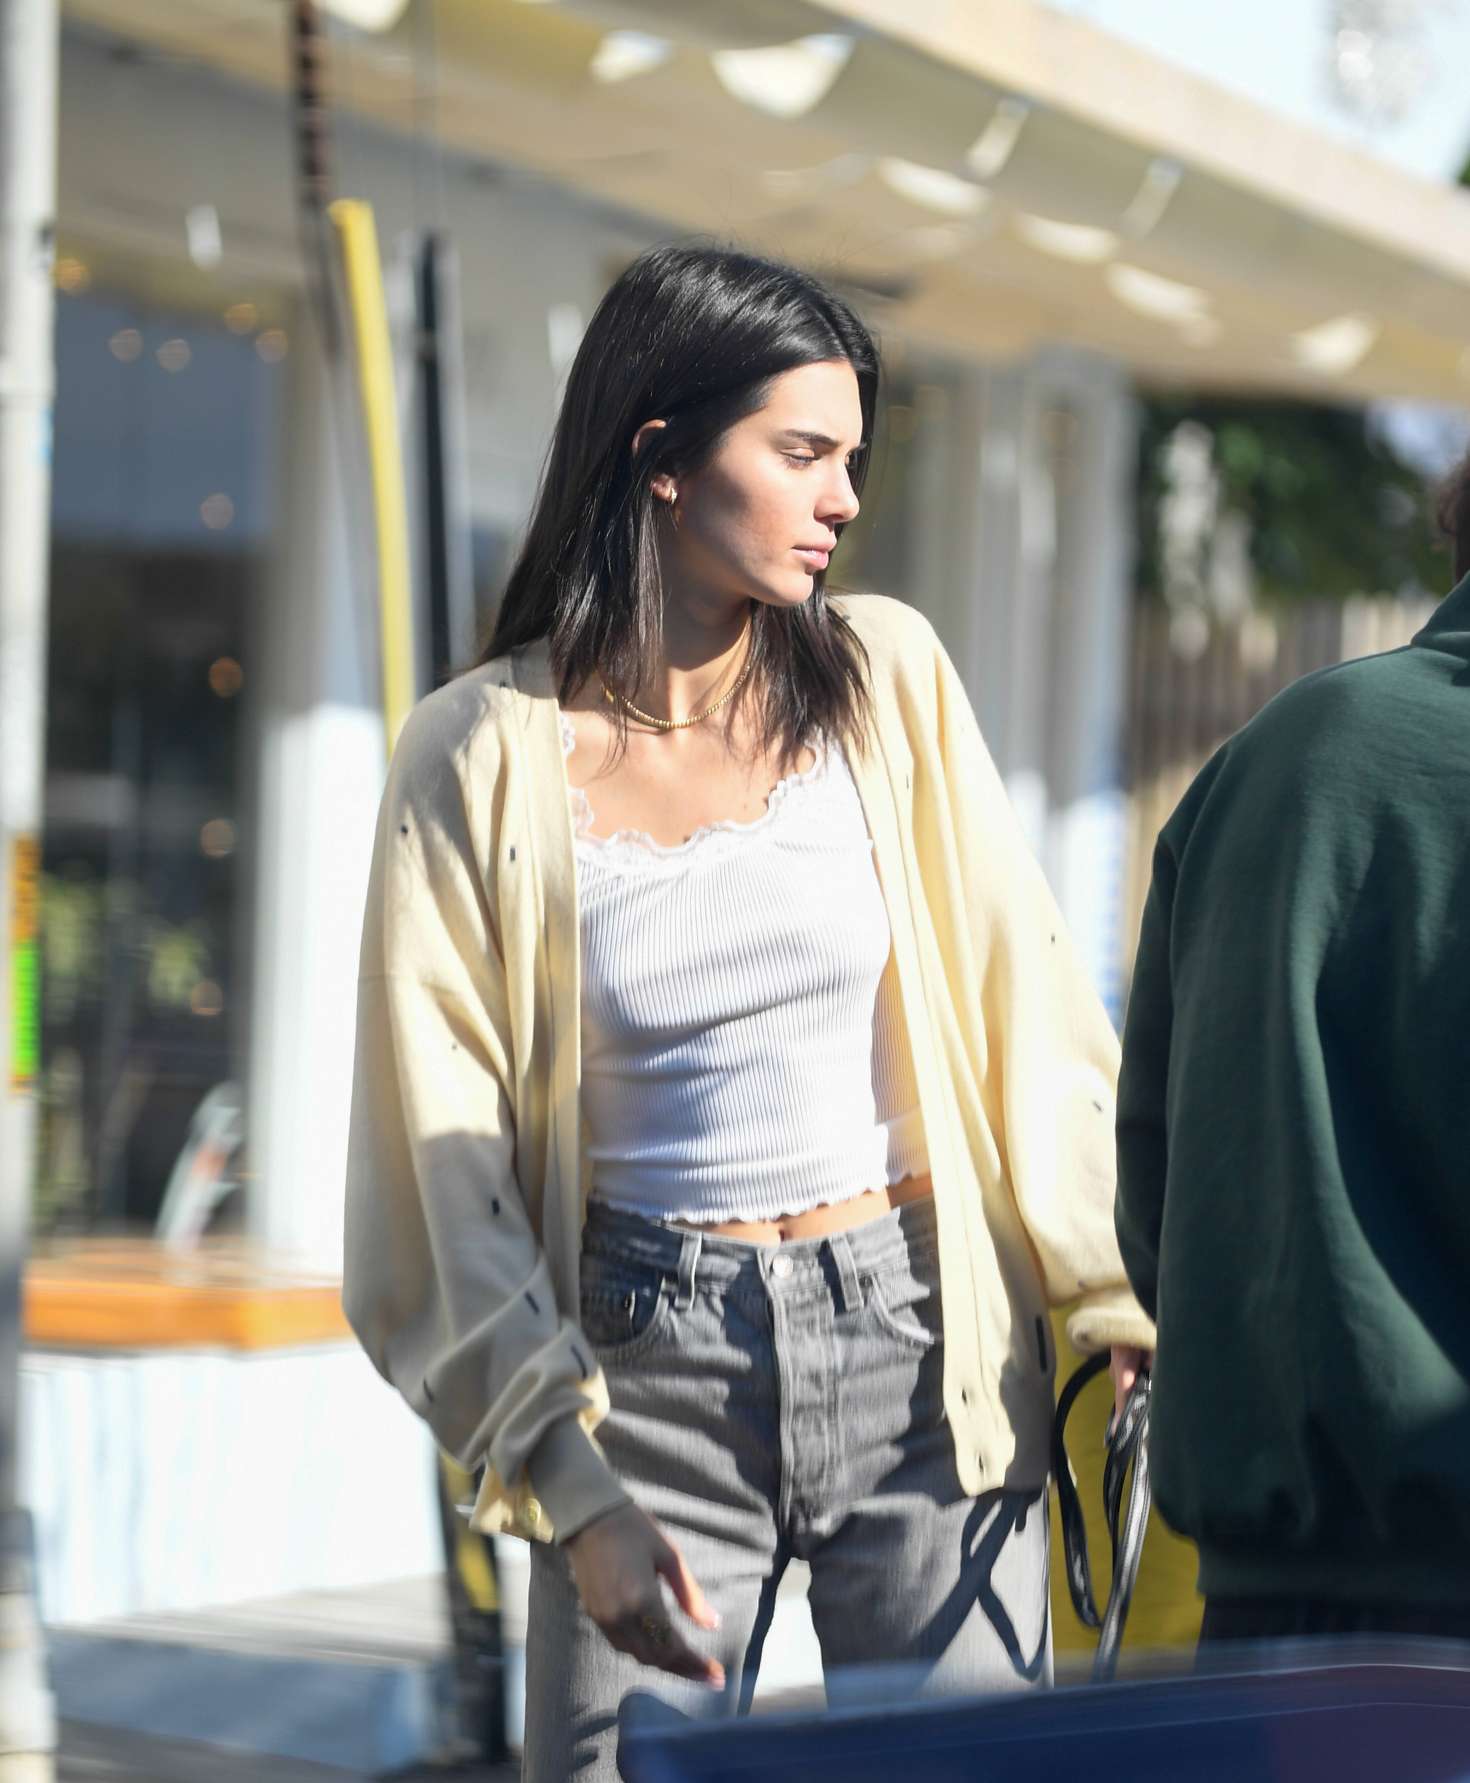 Kendall Jenner with her dog out for breakfast in LA